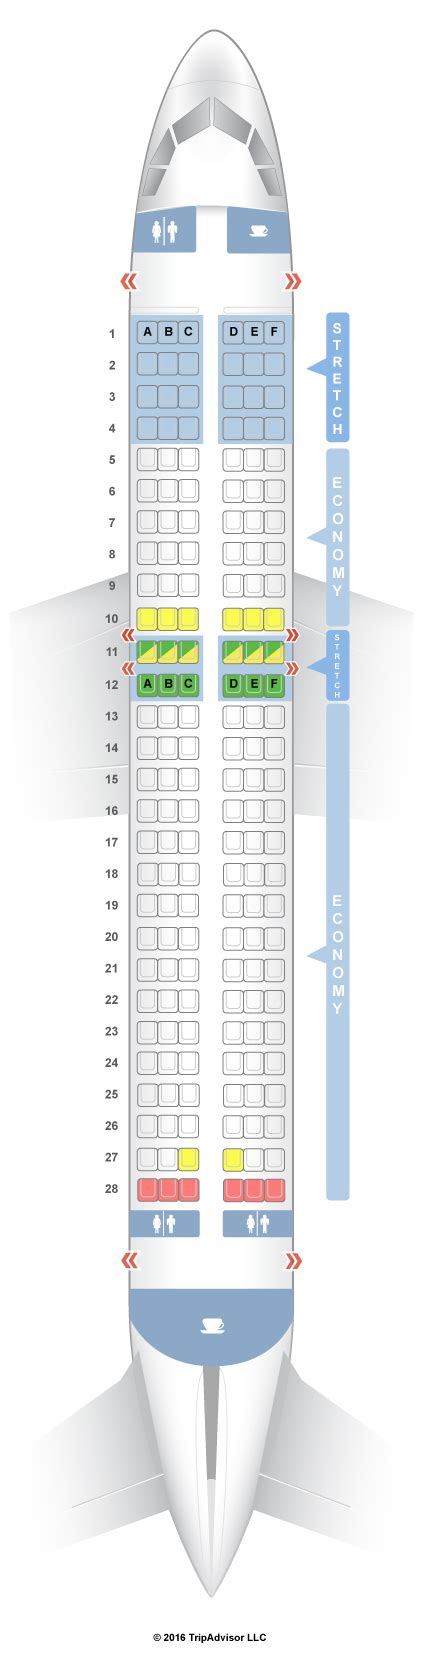 Seat 7B on Frontier Airbus A320 (320) Add 